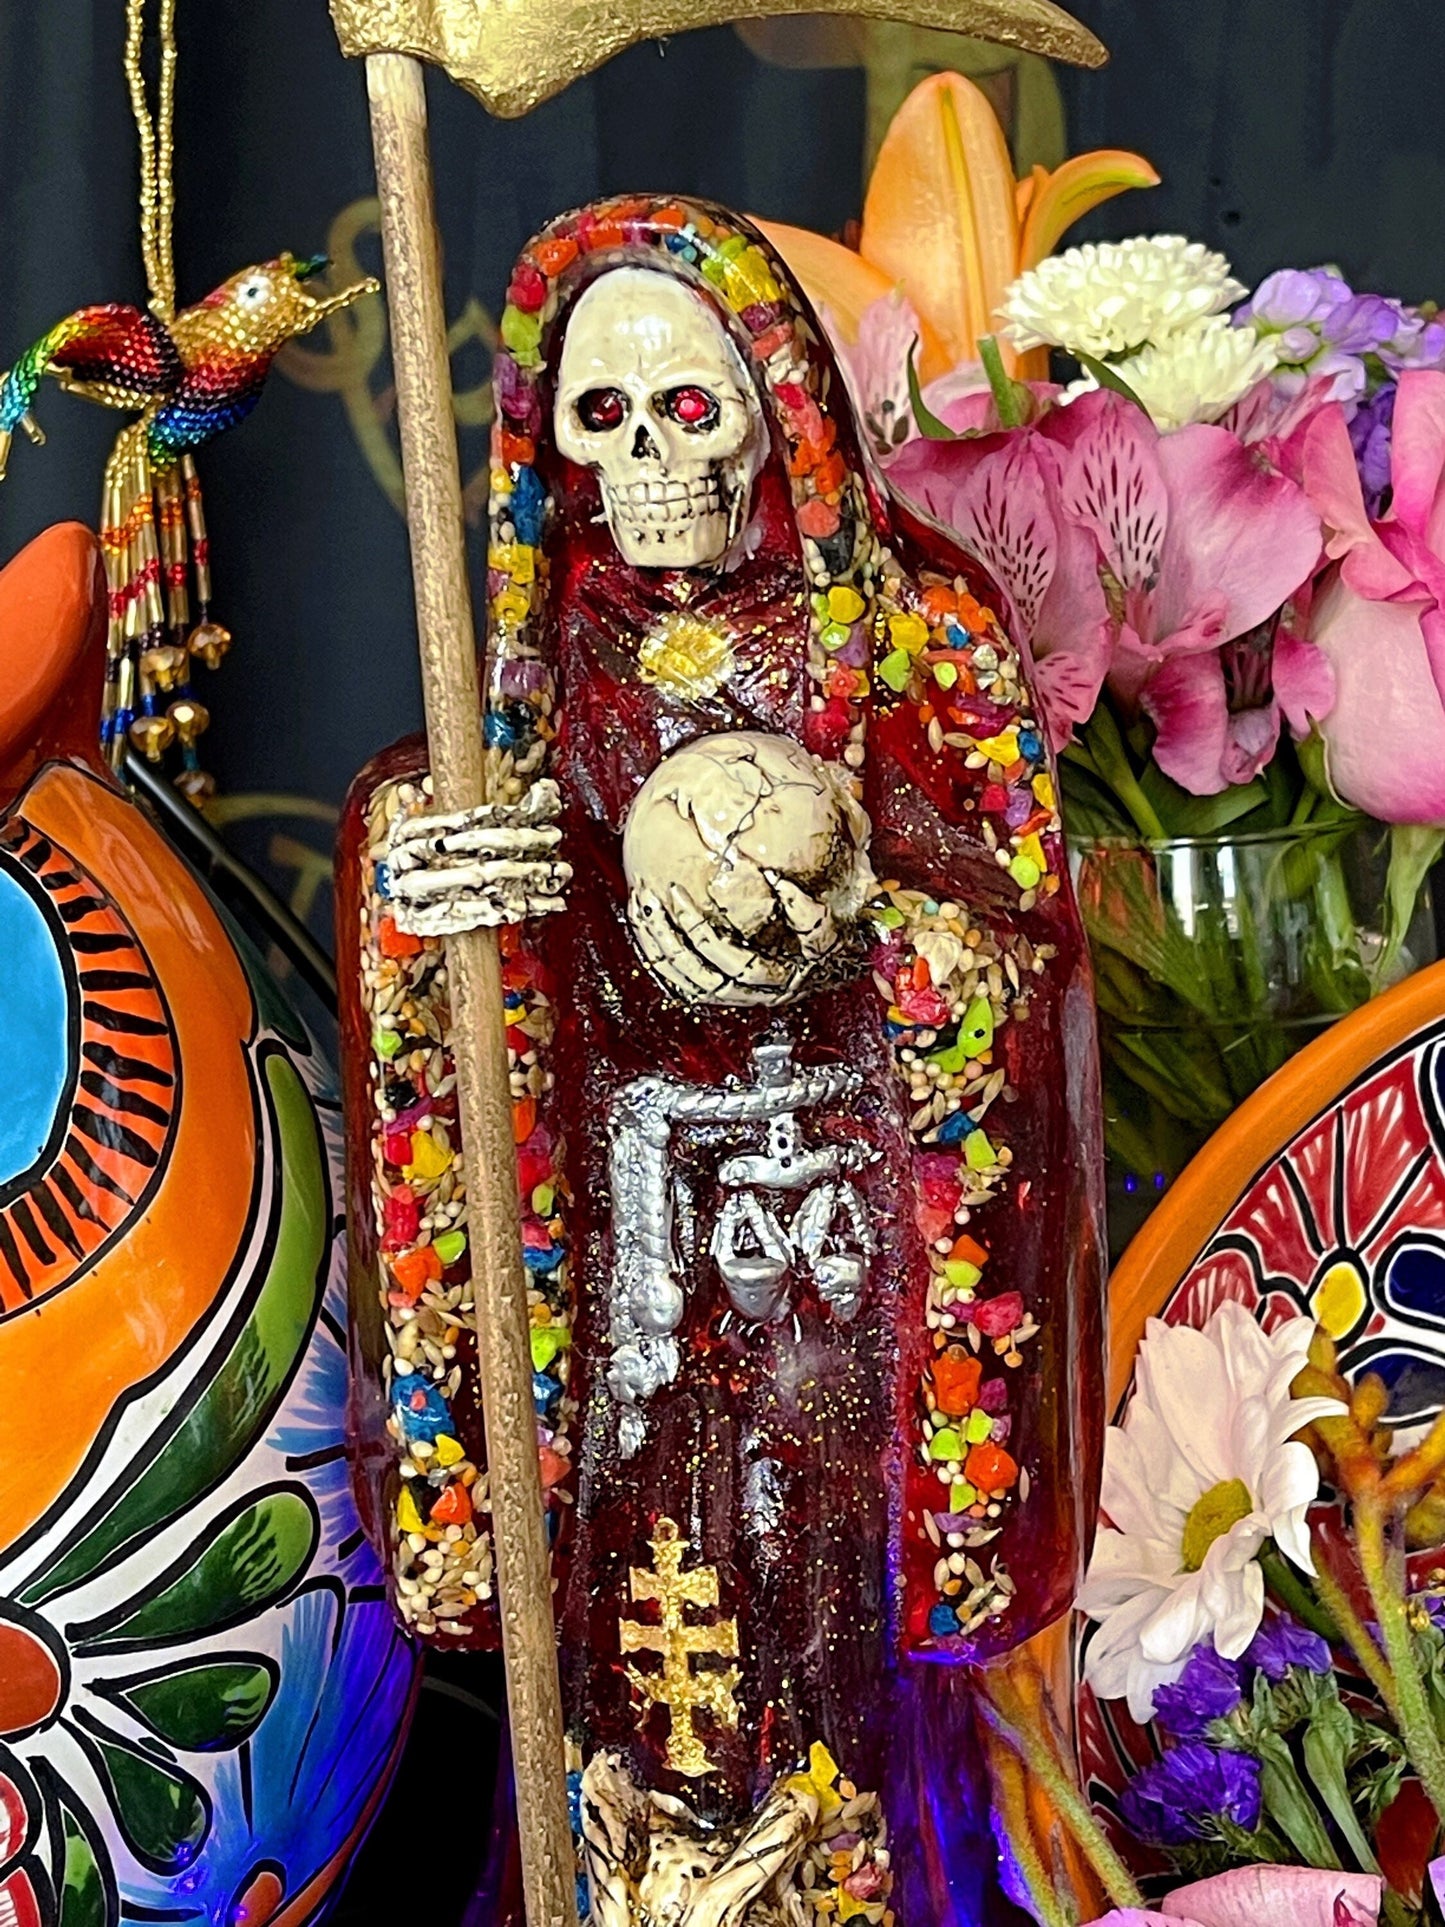 LIGHTS UP! Santa Muerte Roja Statue + Love + Money + Justice + 24K Gold Leaf + Baptized + Fixed + Made in Mexico